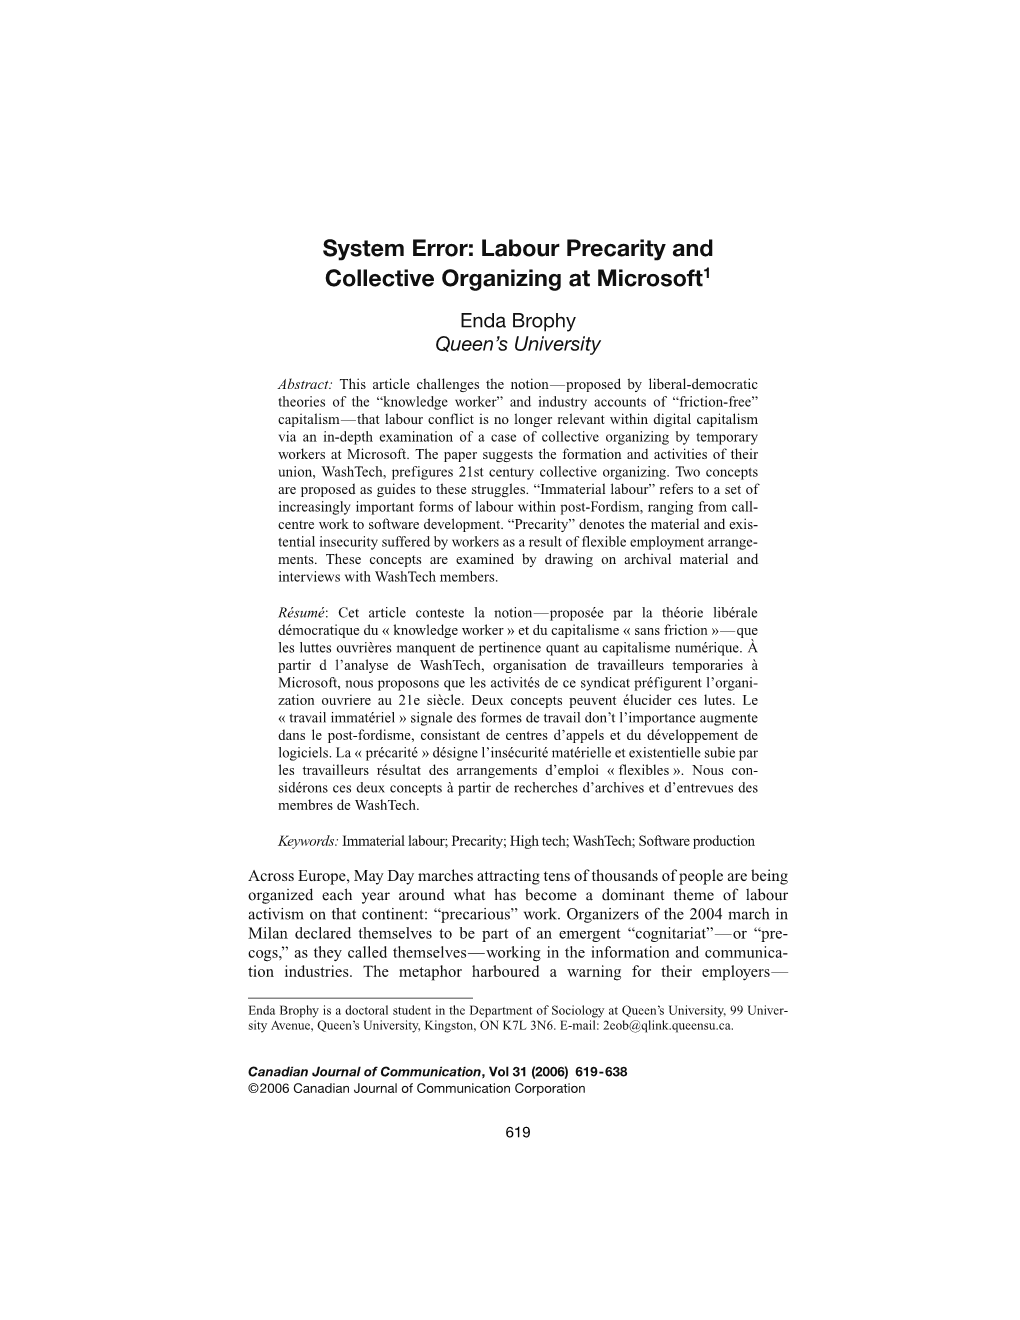 Labour Precarity and Collective Organizing at Microsoft1